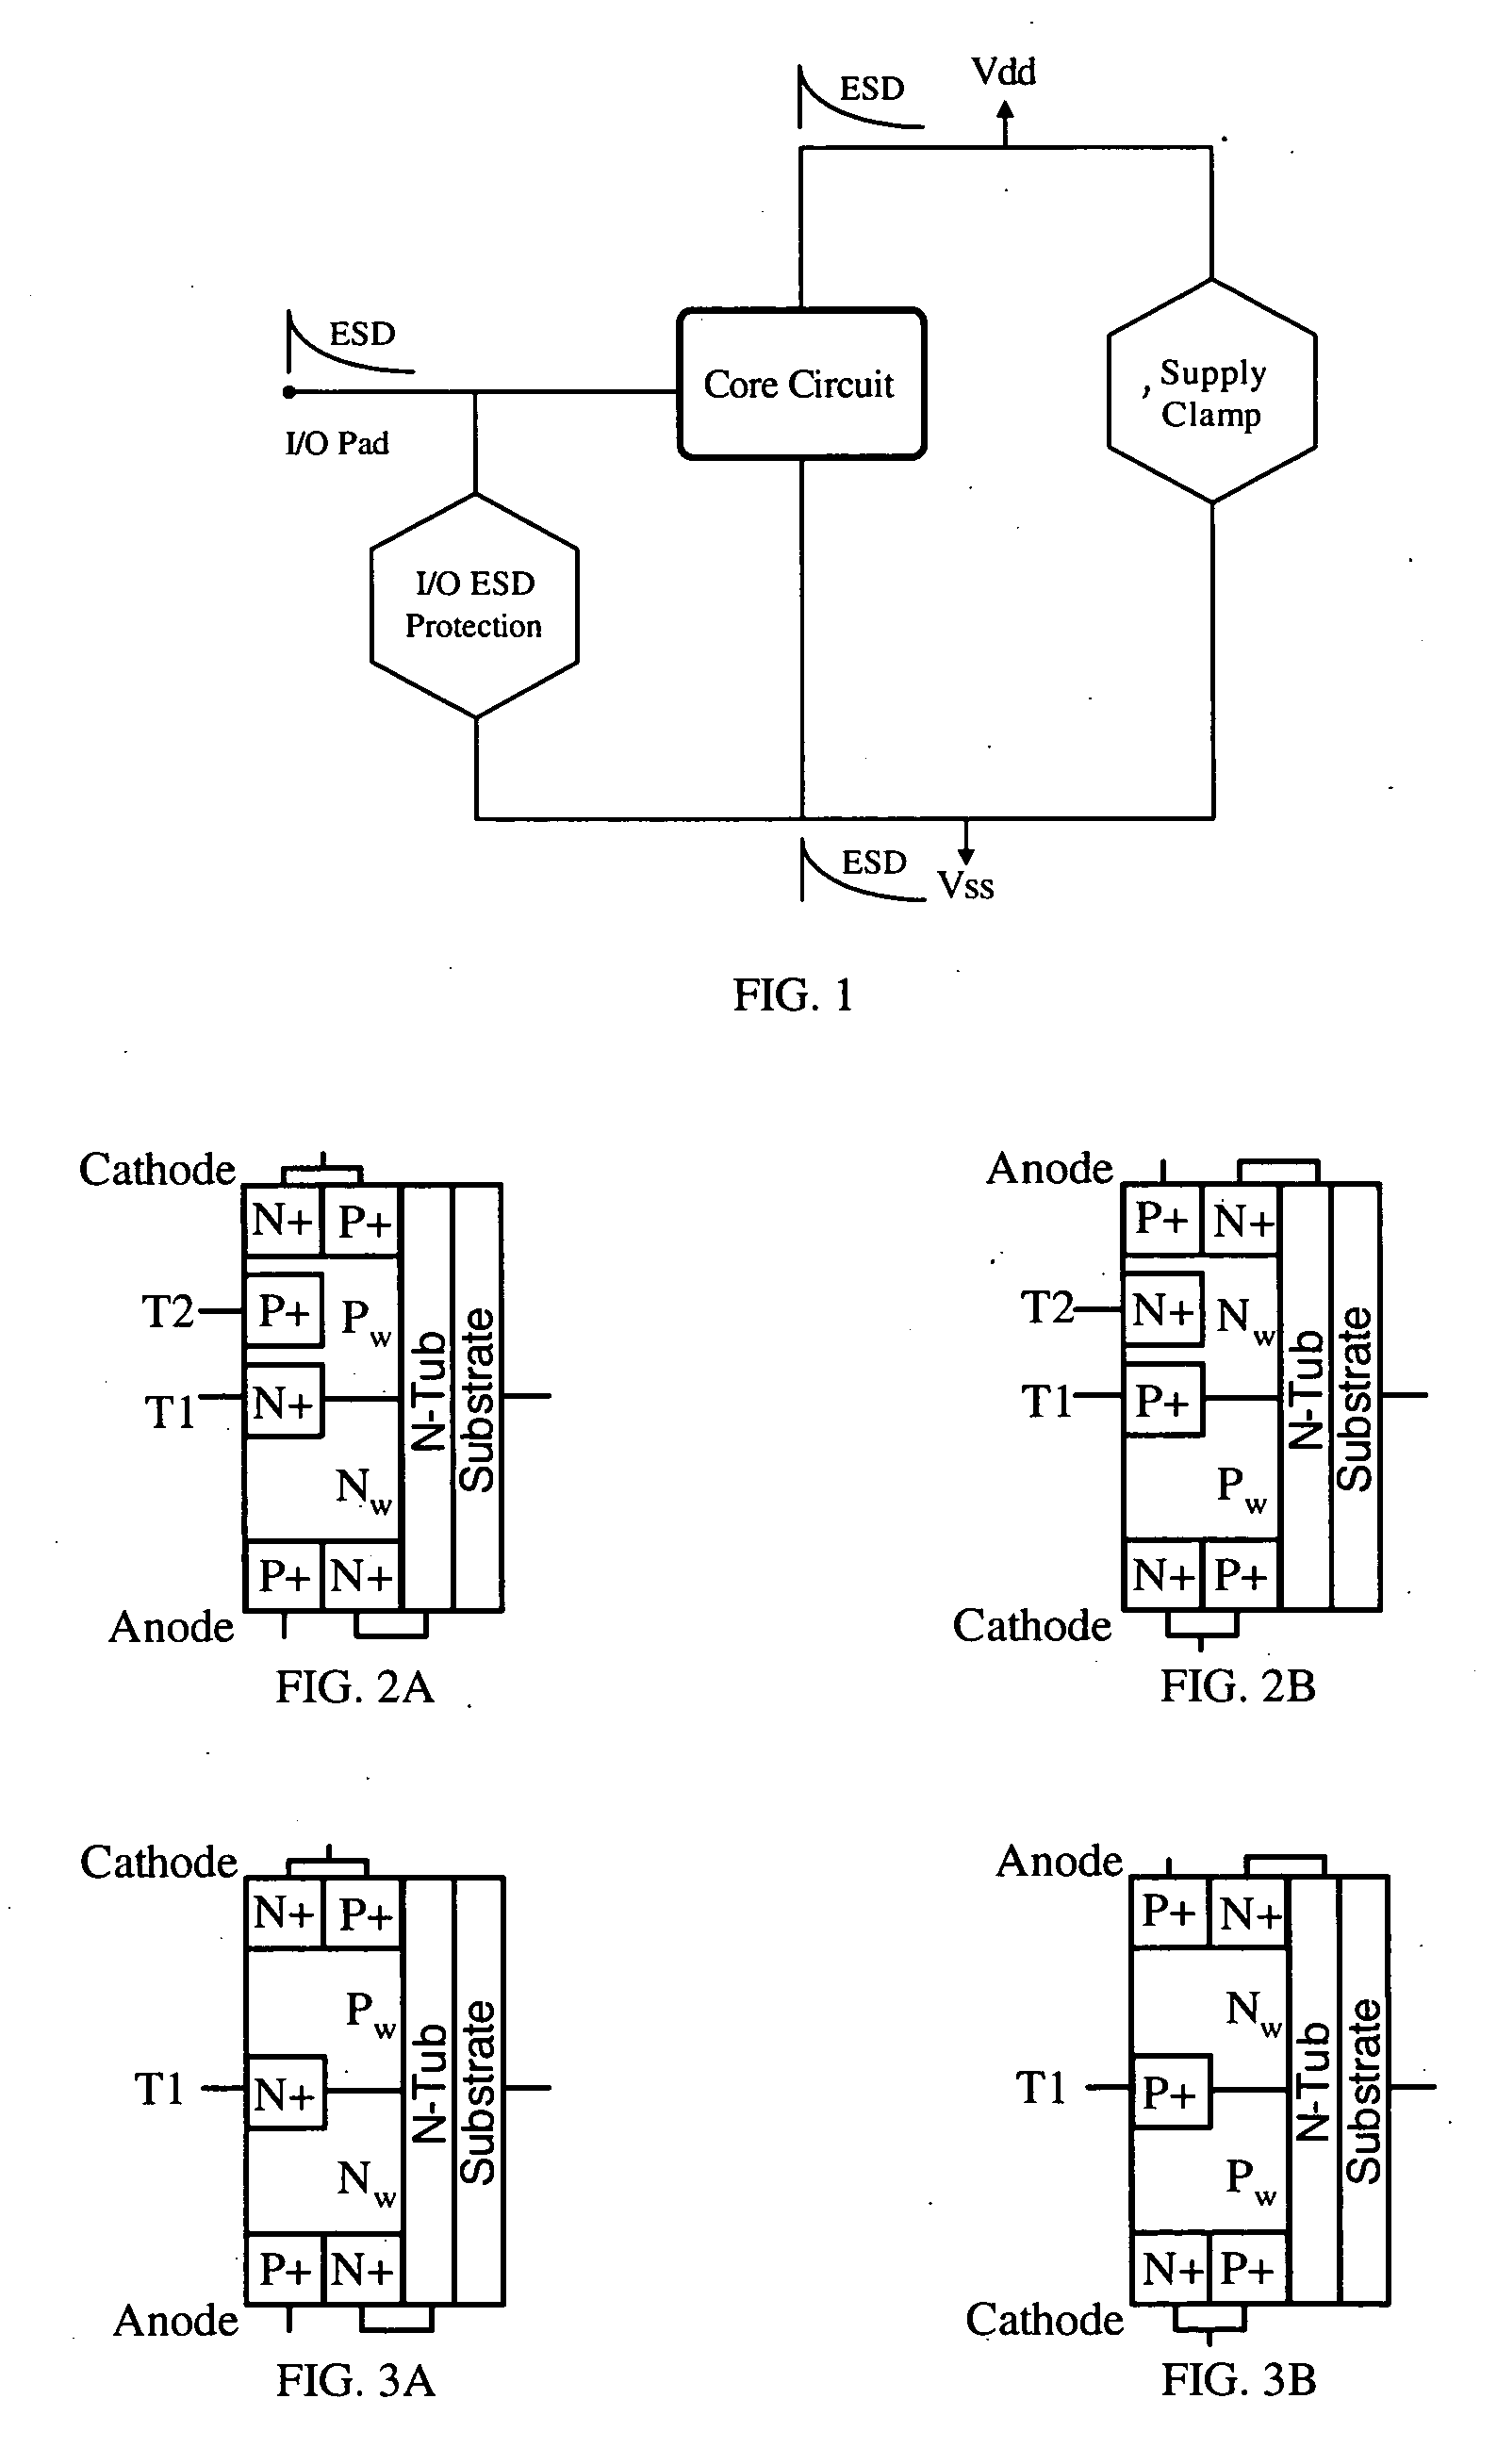 Electrostatic discharge protection device for digital circuits and for applications with input/output bipolar voltage much higher than the core circuit power supply